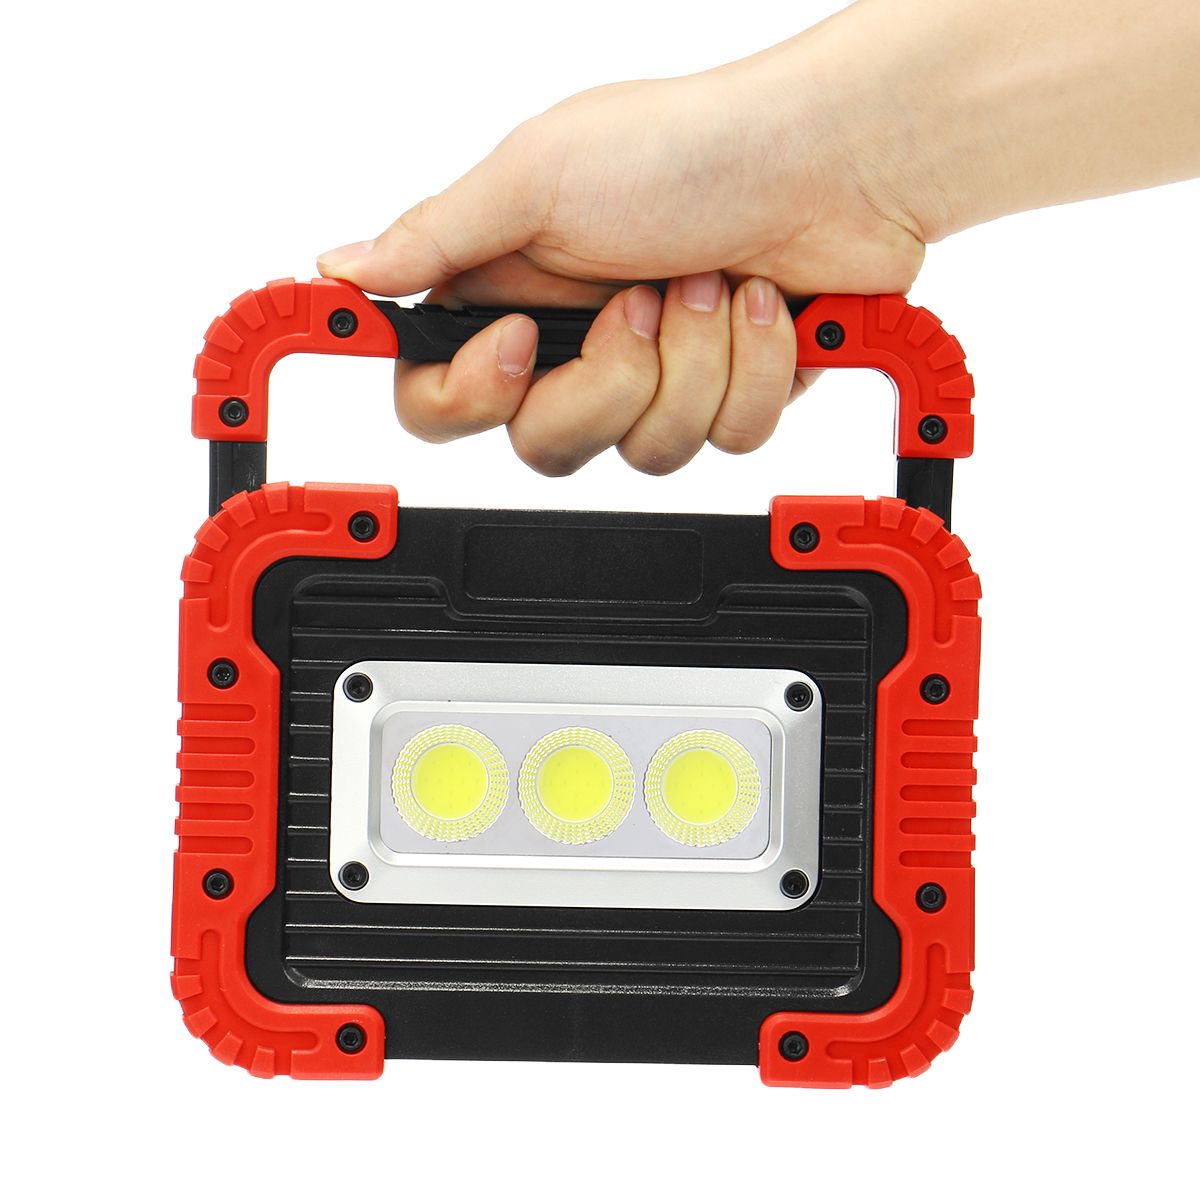 3xCOB-LED-450Lumens-3Modes-Waterproof-Camping-Lamp-Flashlight-Foldable-Work-Light-Searchlight-For-Ni-1633893